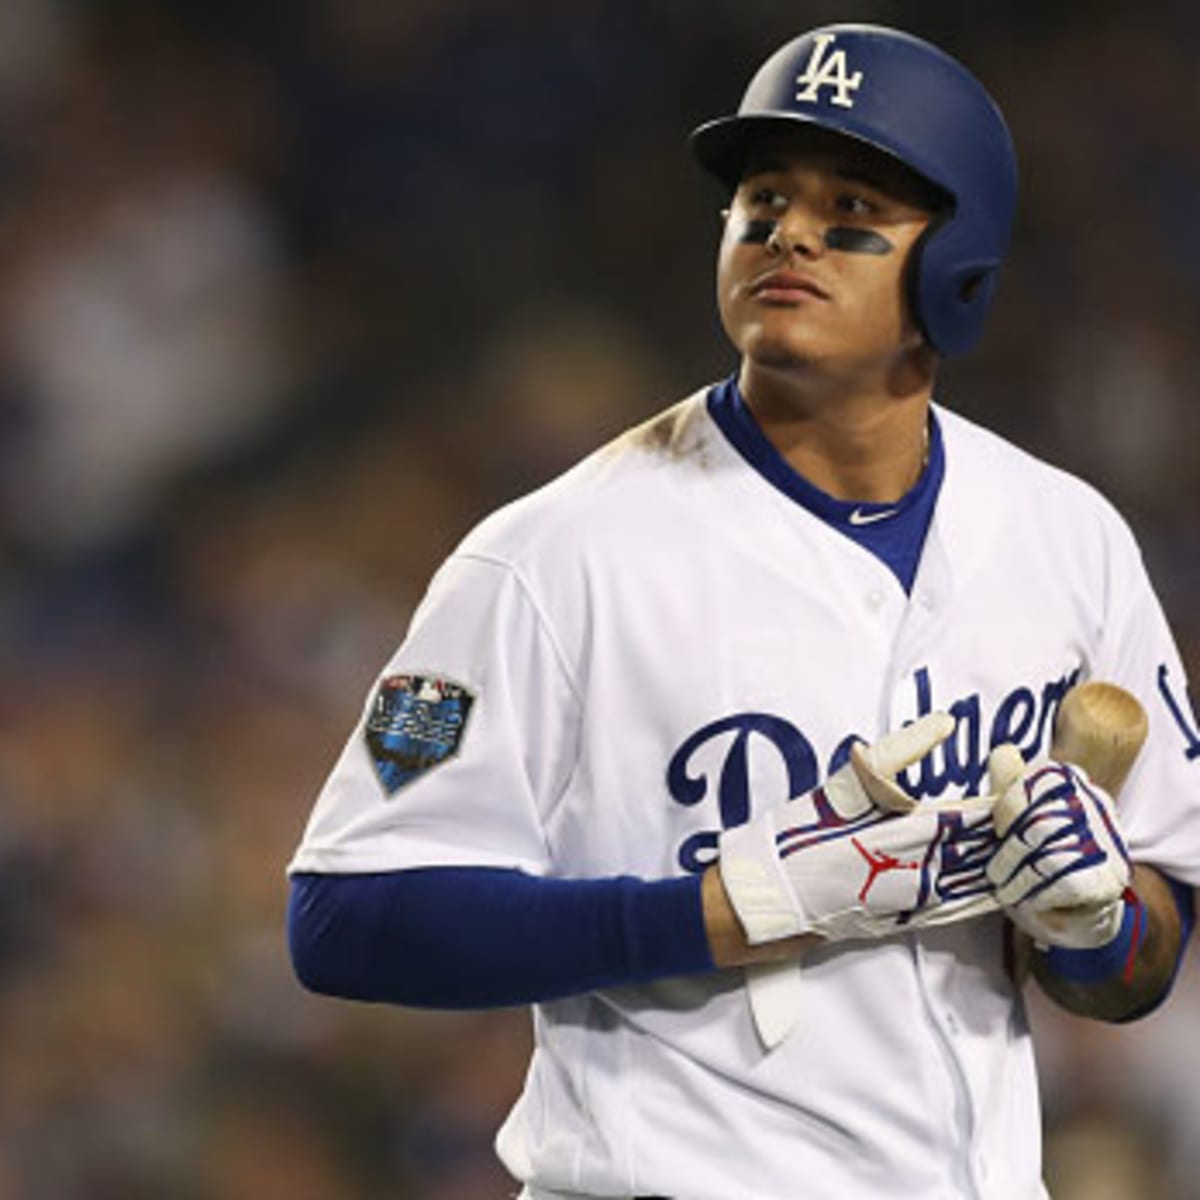 Manny Machado might be hinting at the type of manager he wants